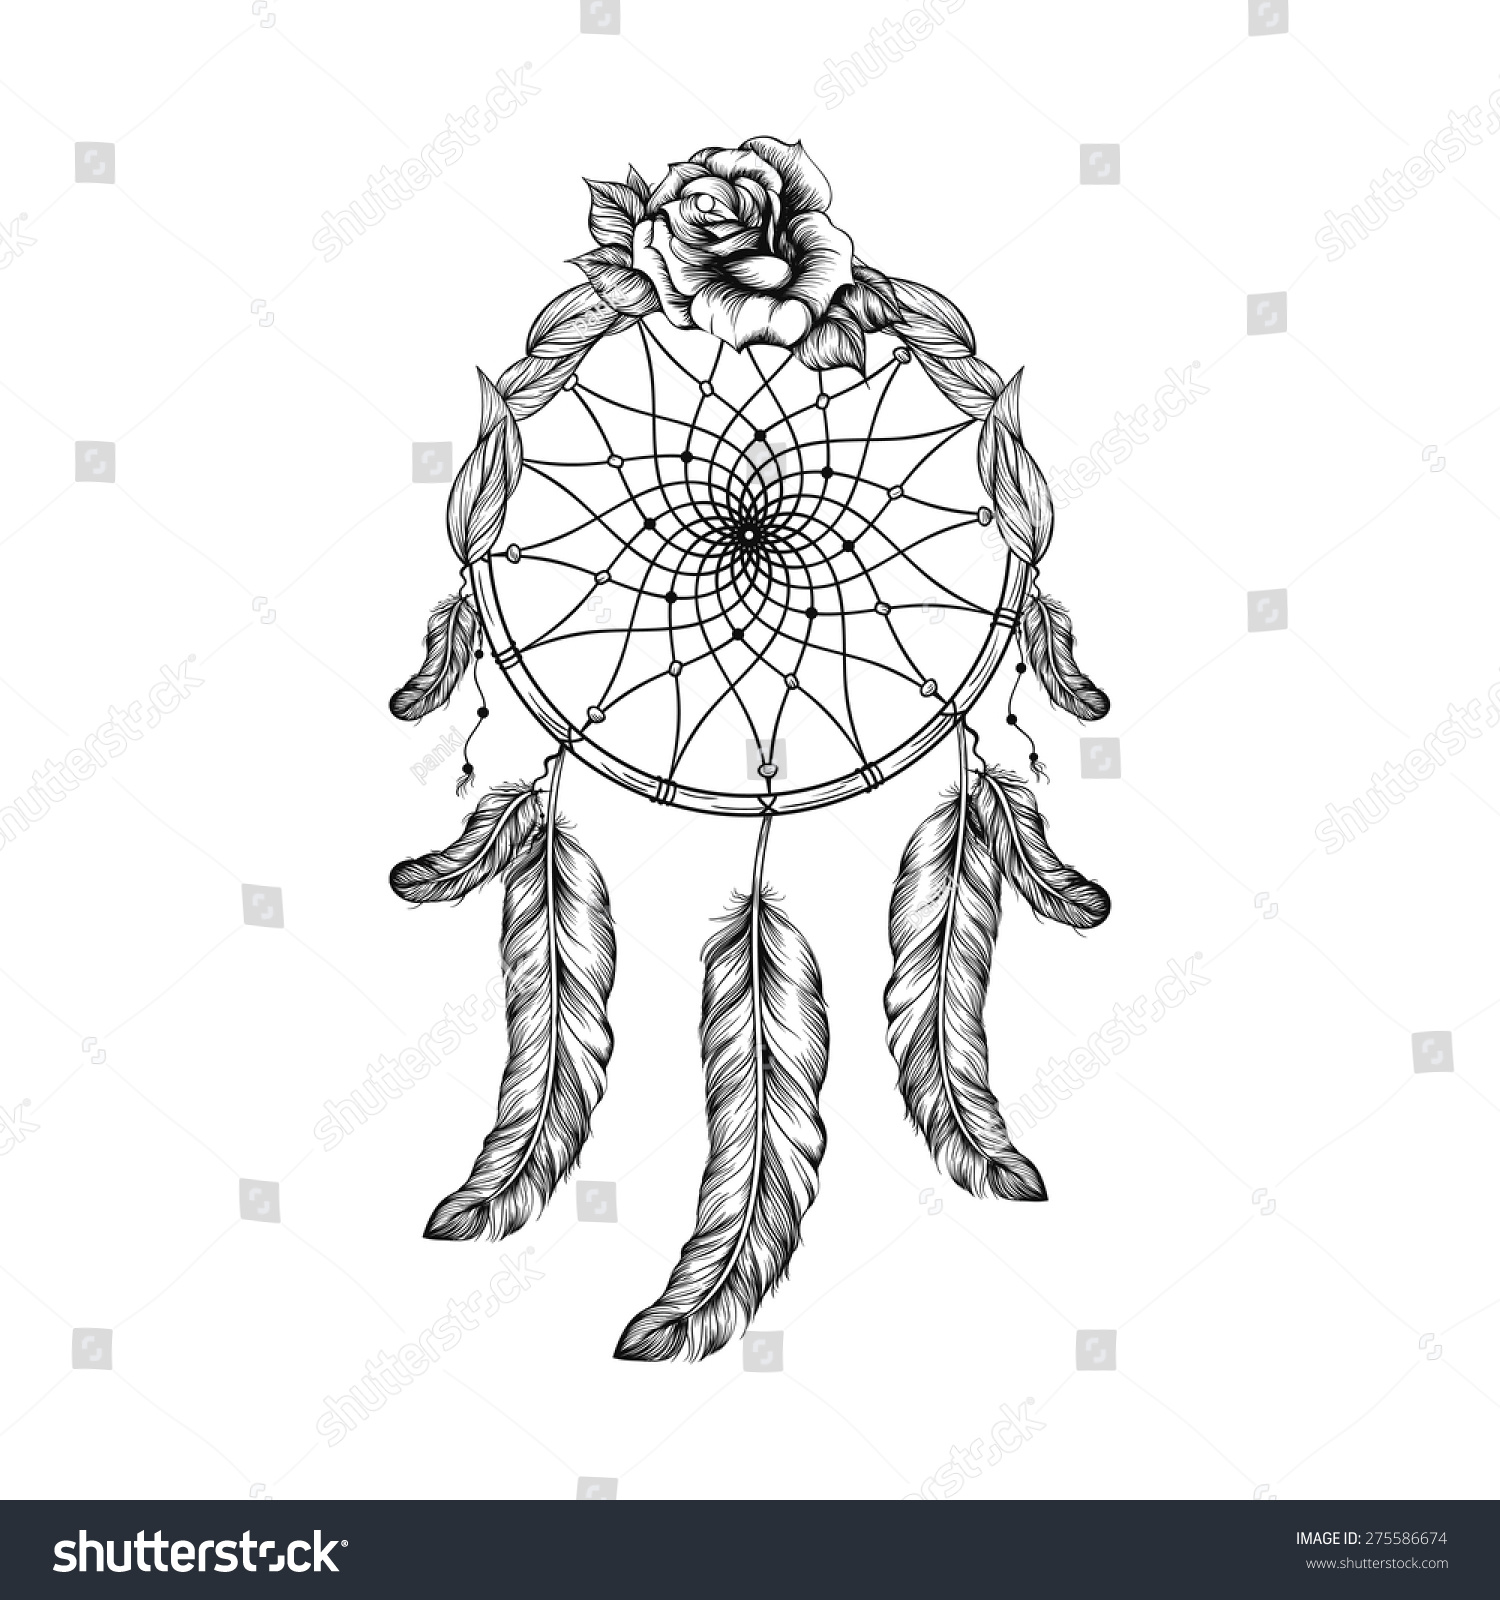 SVG of Dream catcher with feathers, leaves and rose  in line art style, high detailed ritual thing. American boho spirit. Hand drawn sketch vector illustration for tattoos or t-shirt print. svg